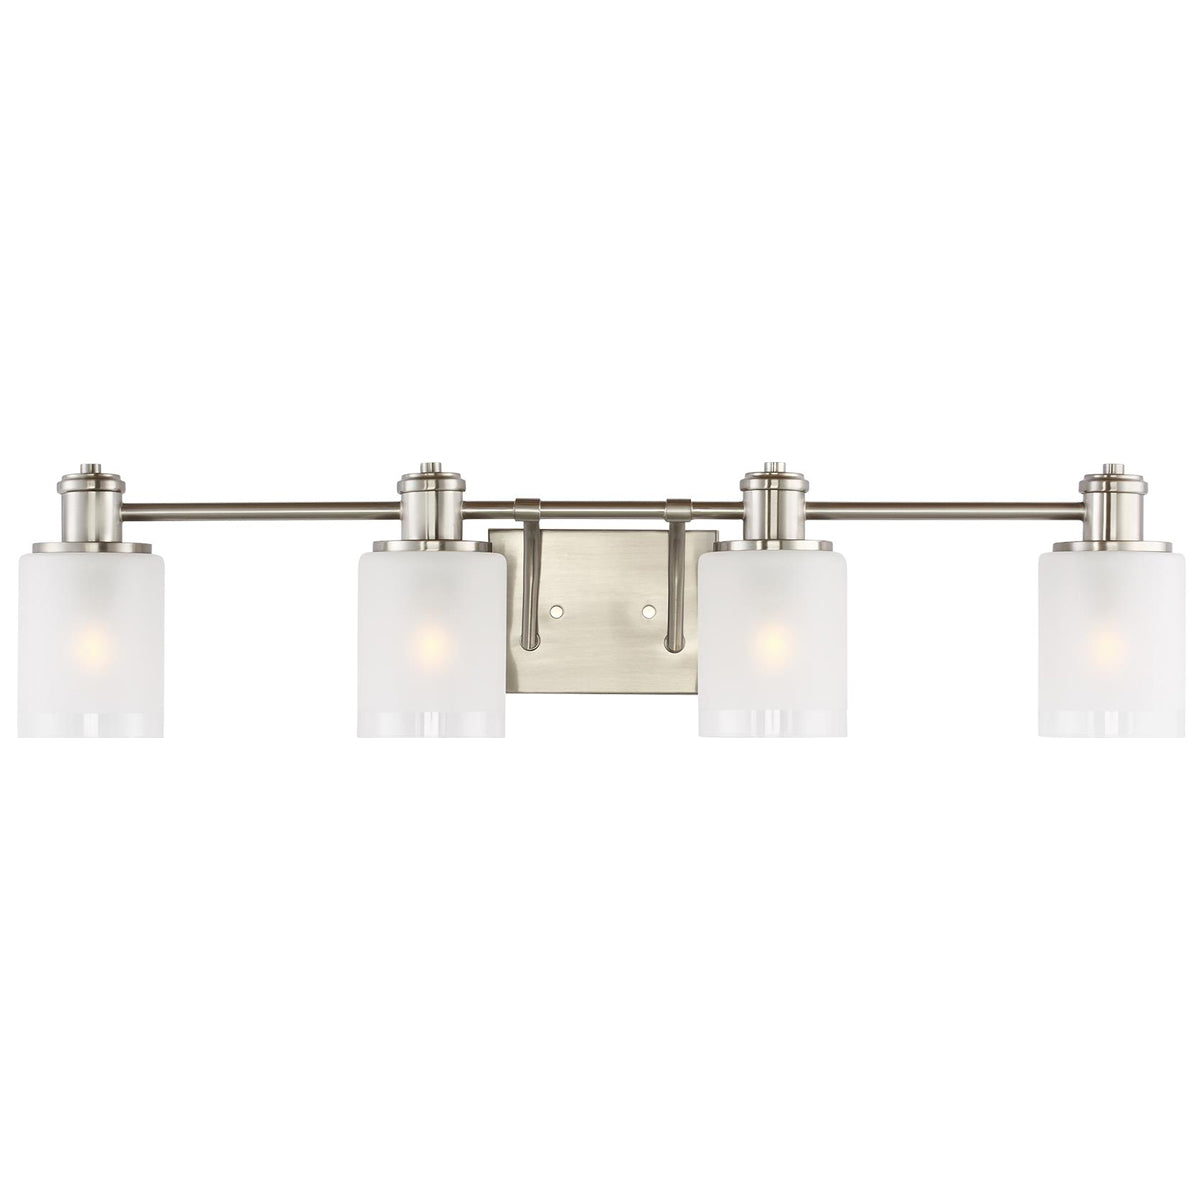 Sea Gull Lighting Norwood 4-Light Wall/Bath Sconce without Bulb